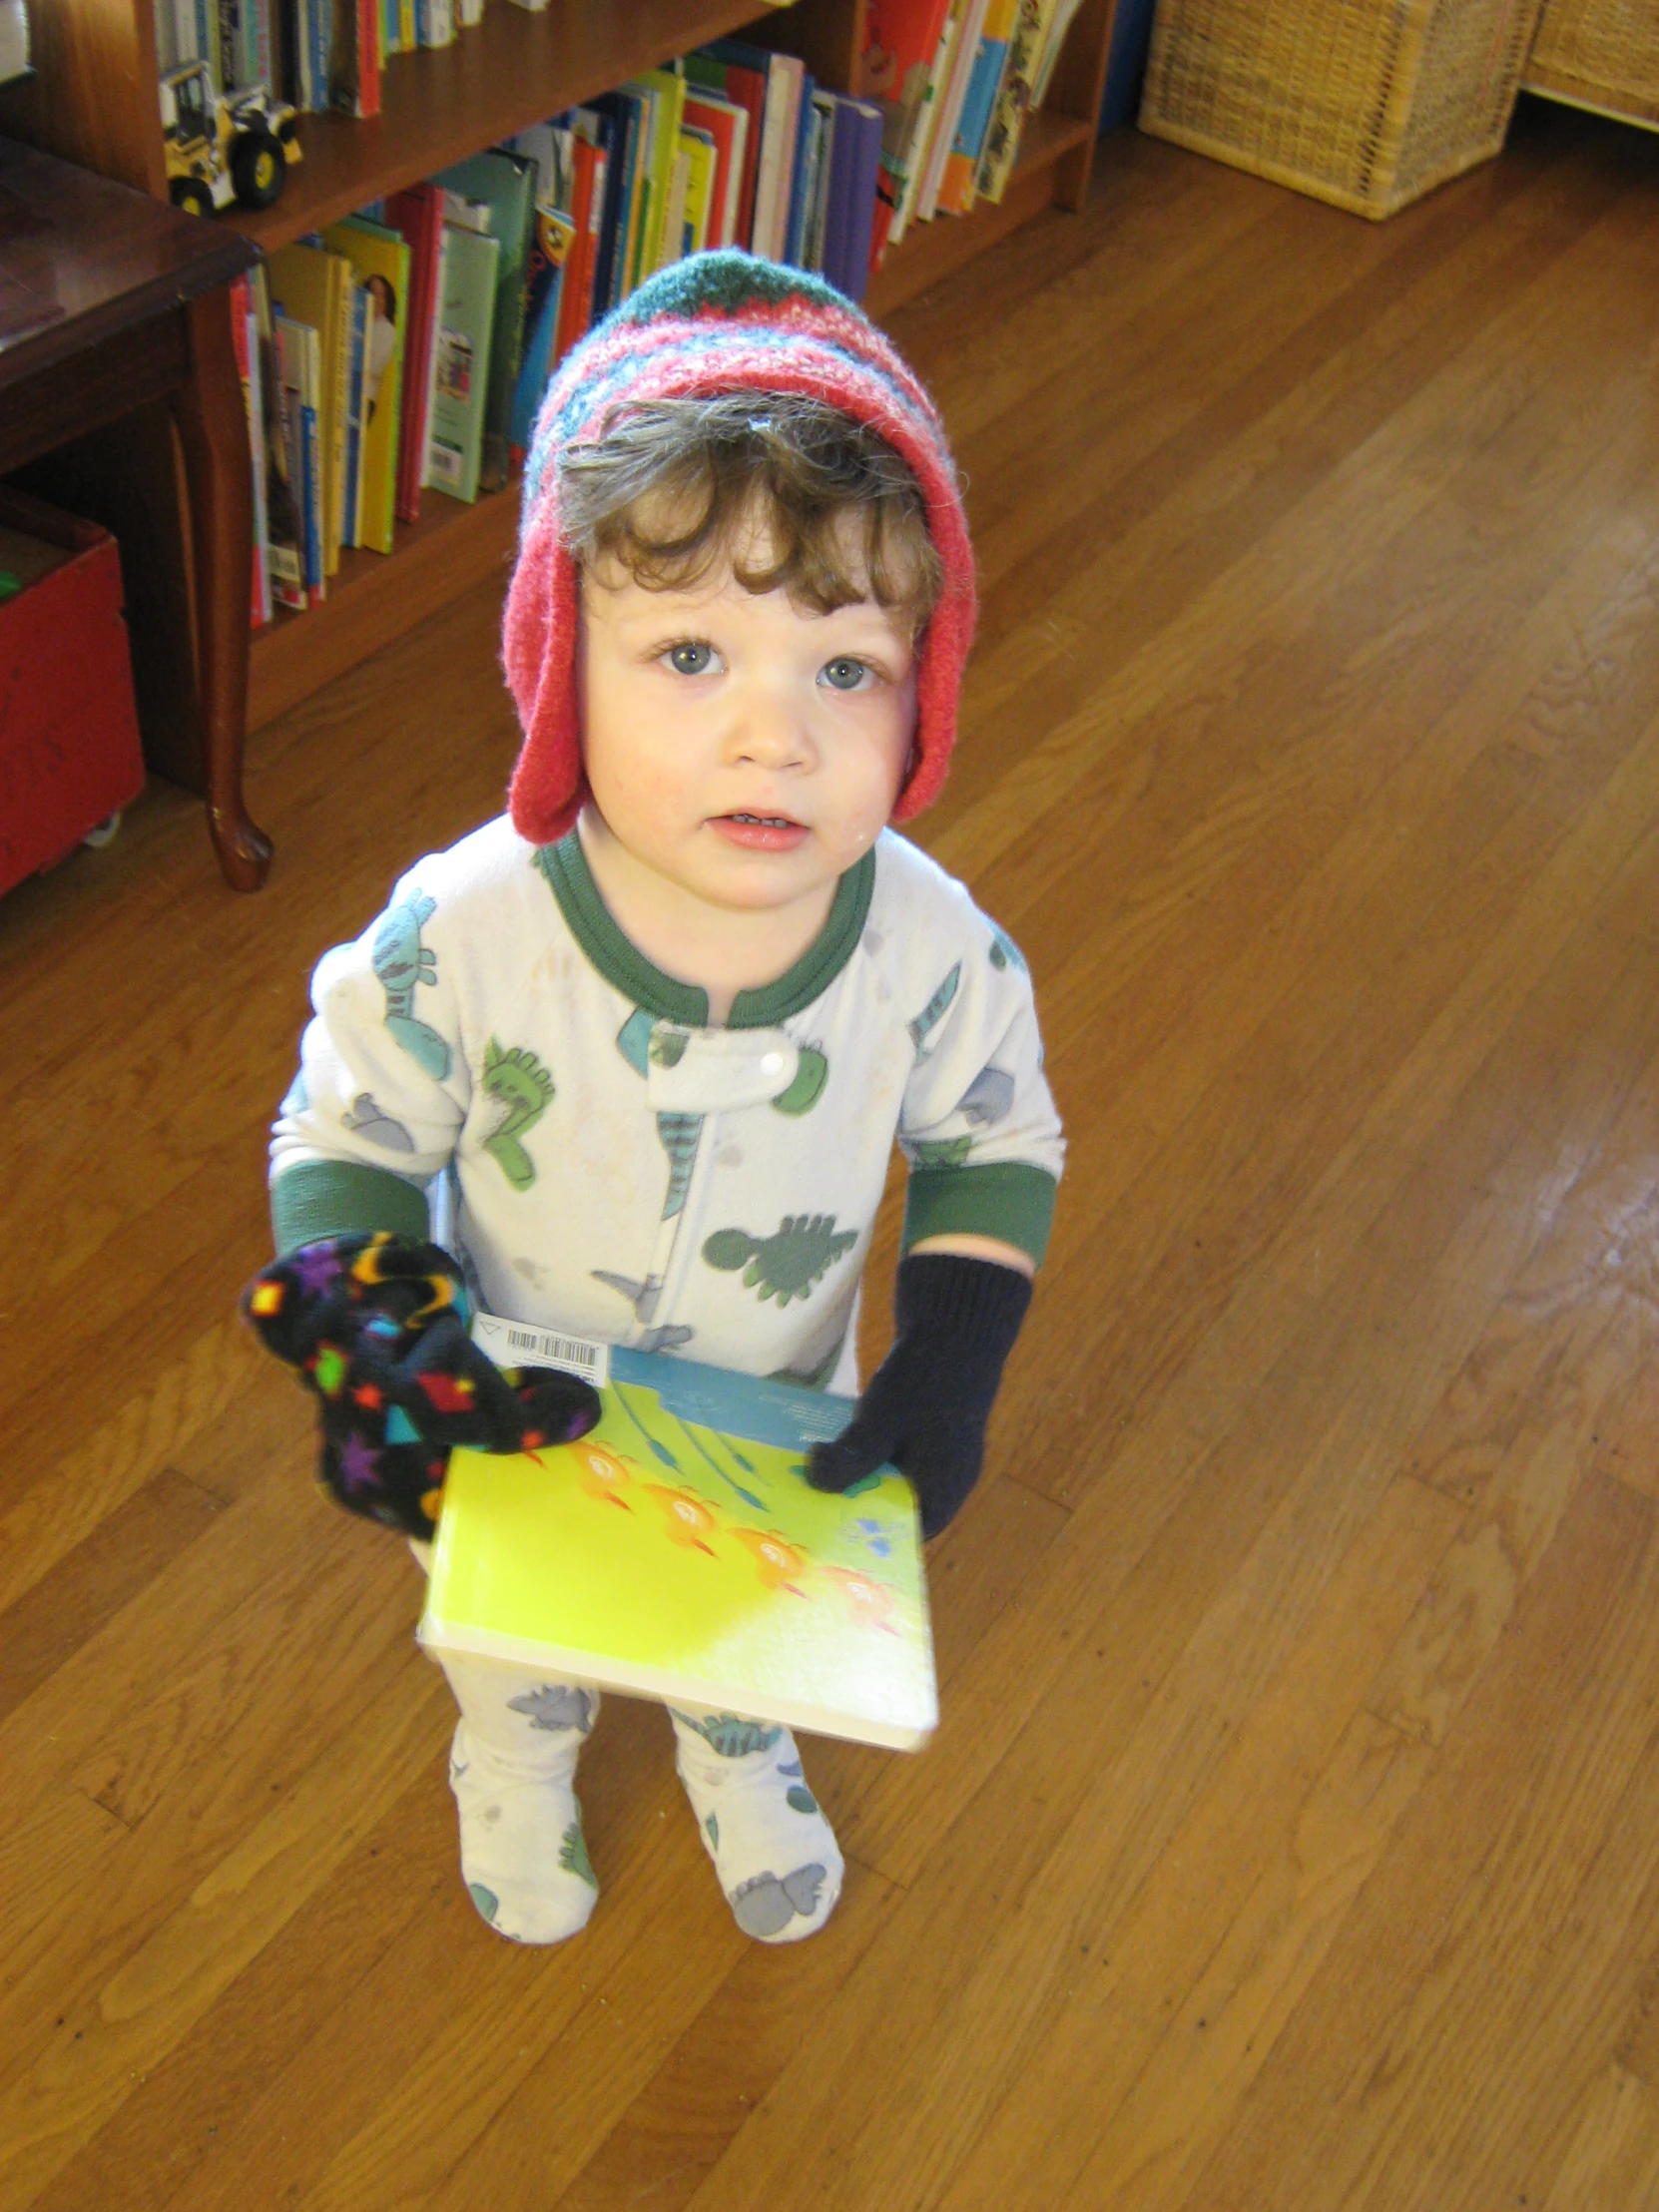 small child in pajamas and a red beanie holding a yellow item